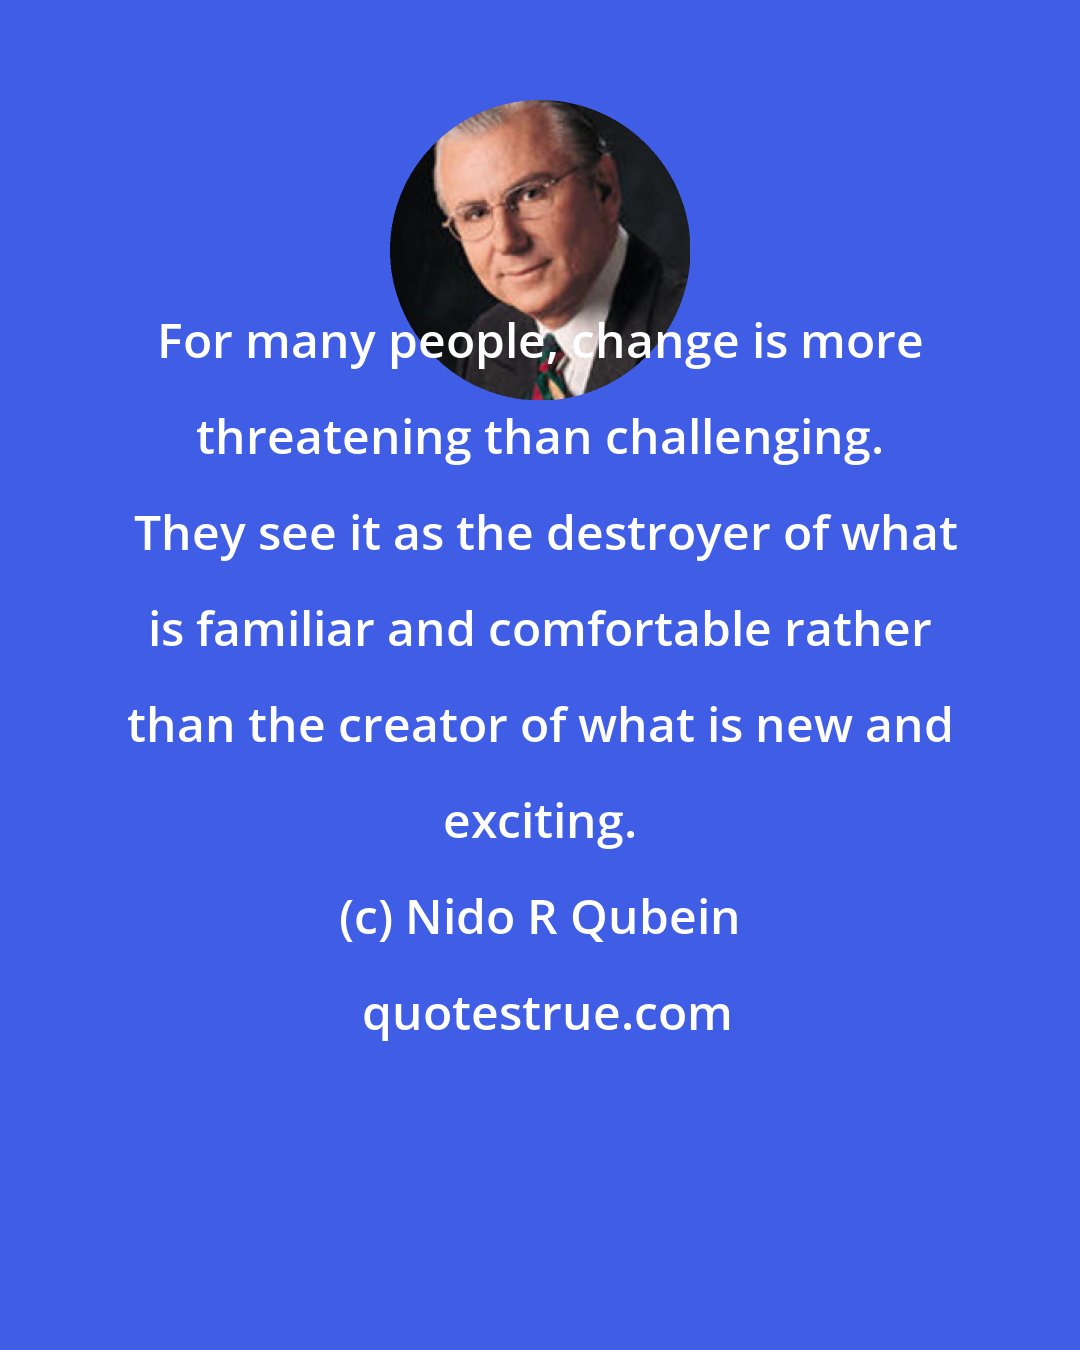 Nido R Qubein: For many people, change is more threatening than challenging.  They see it as the destroyer of what is familiar and comfortable rather than the creator of what is new and exciting.